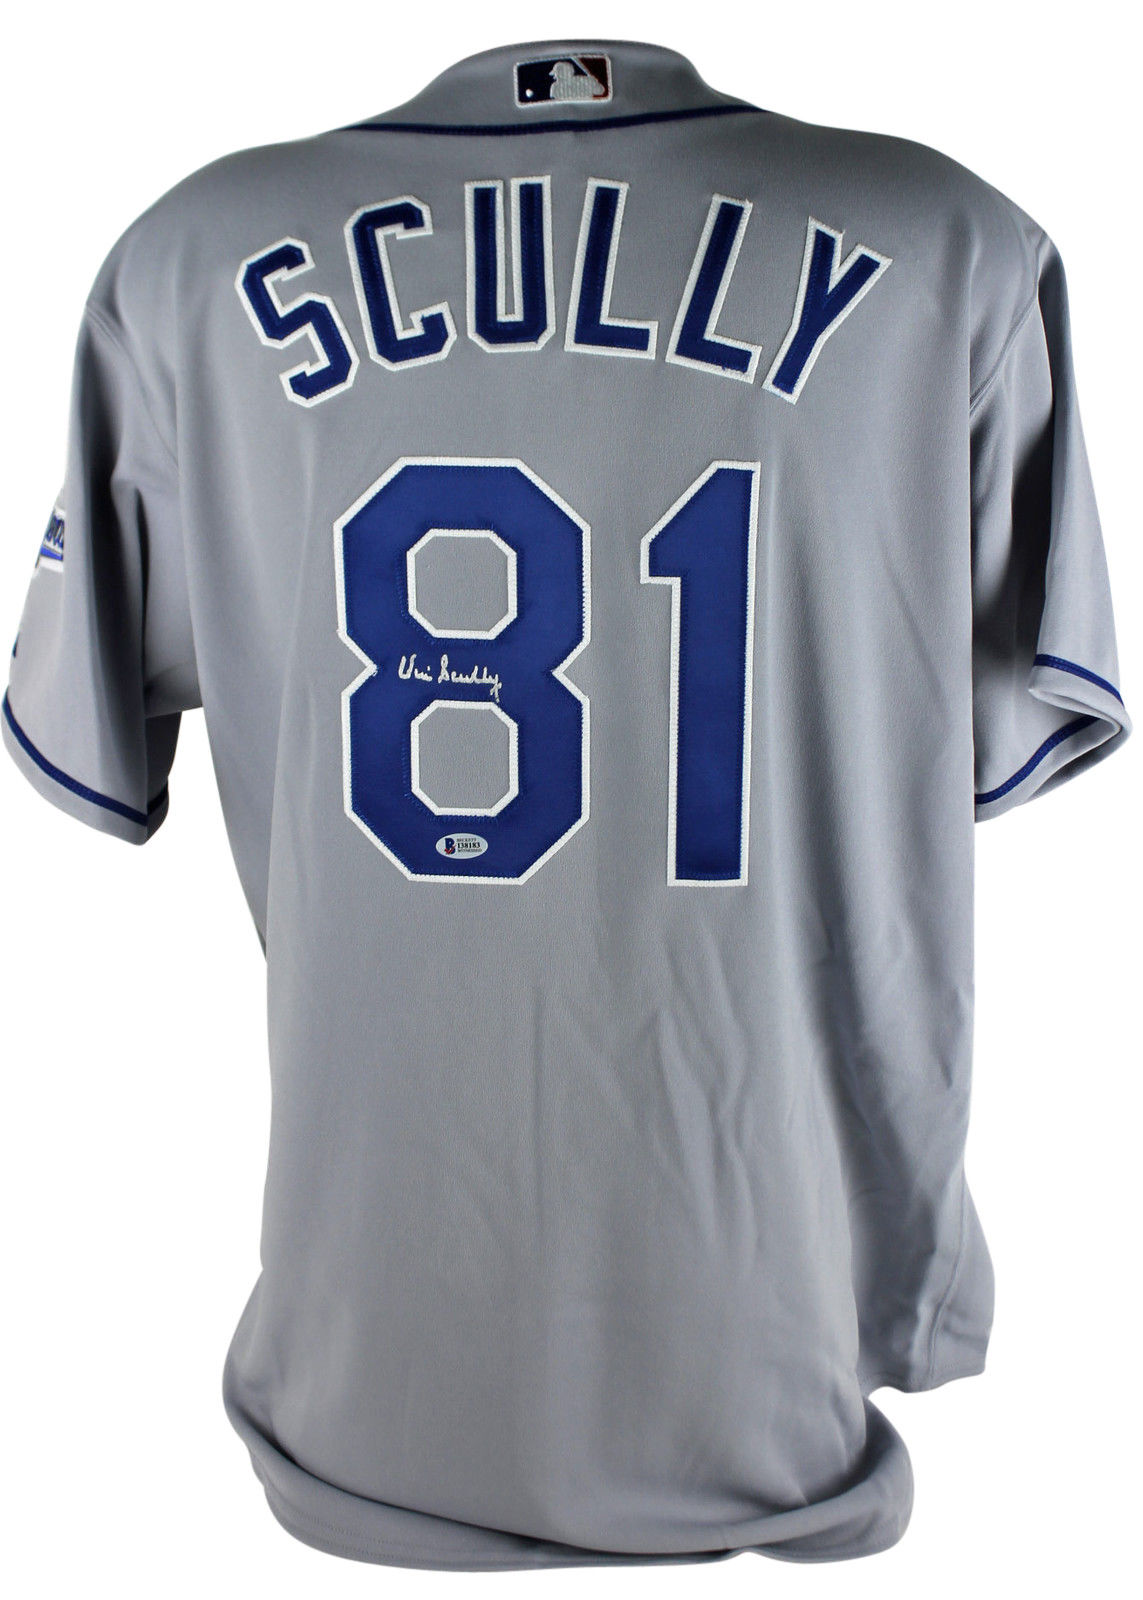 Vin Scully Signed Dodgers Authentic Majestic Jersey (Beckett COA